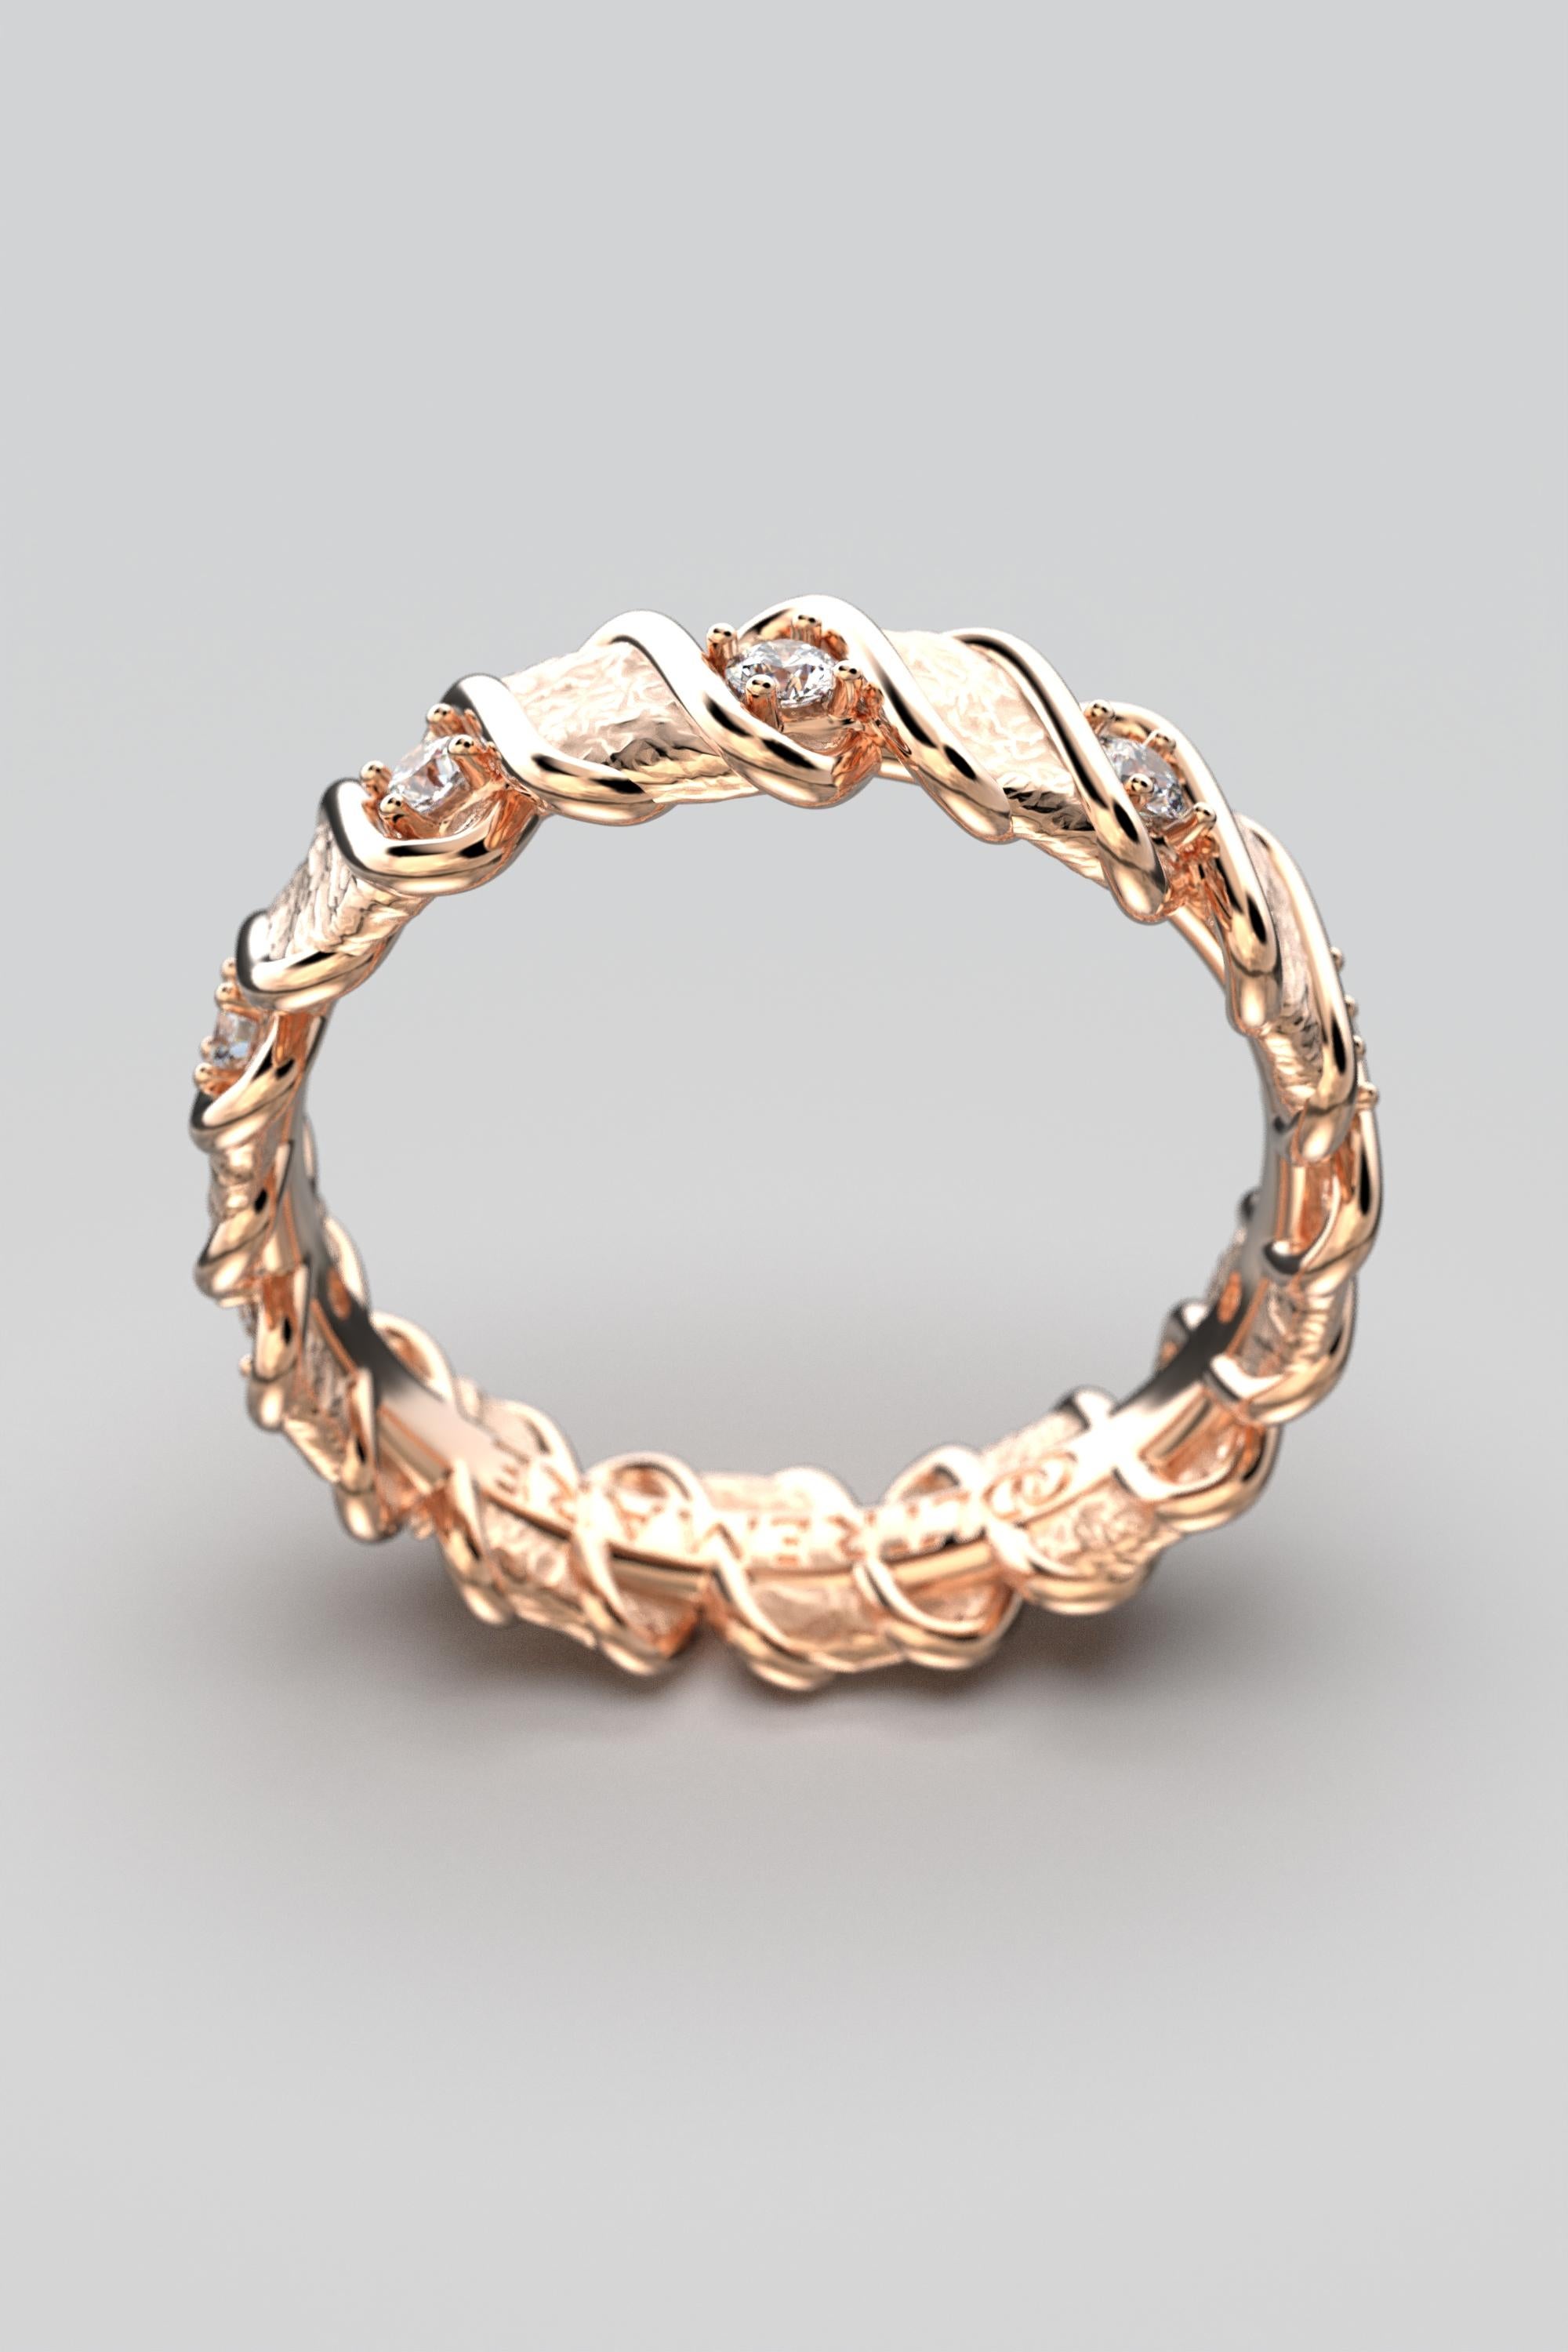 For Sale:  14k Italian Gold Eternity Band with Natural Diamonds  Oltremare Gioielli 7